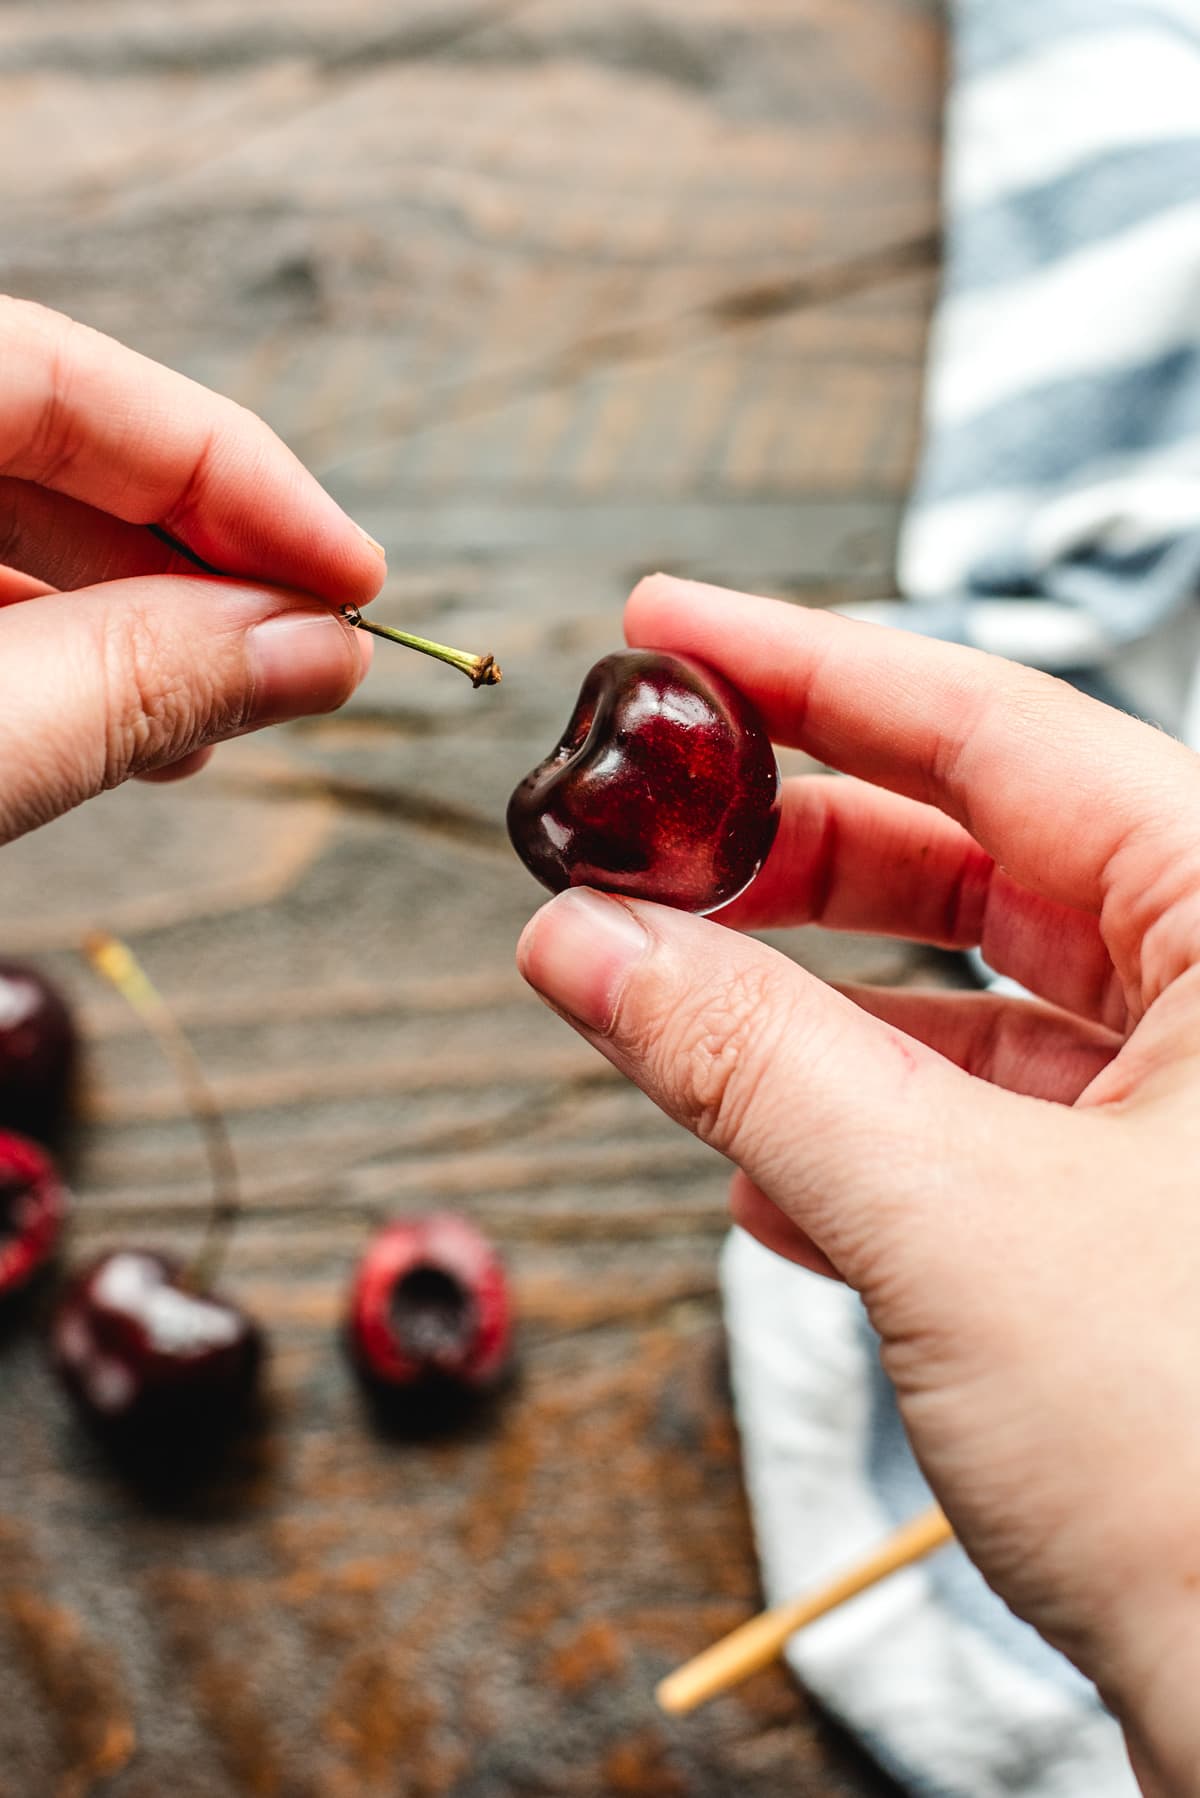 How to Pit Cherries With or Without a Pitter